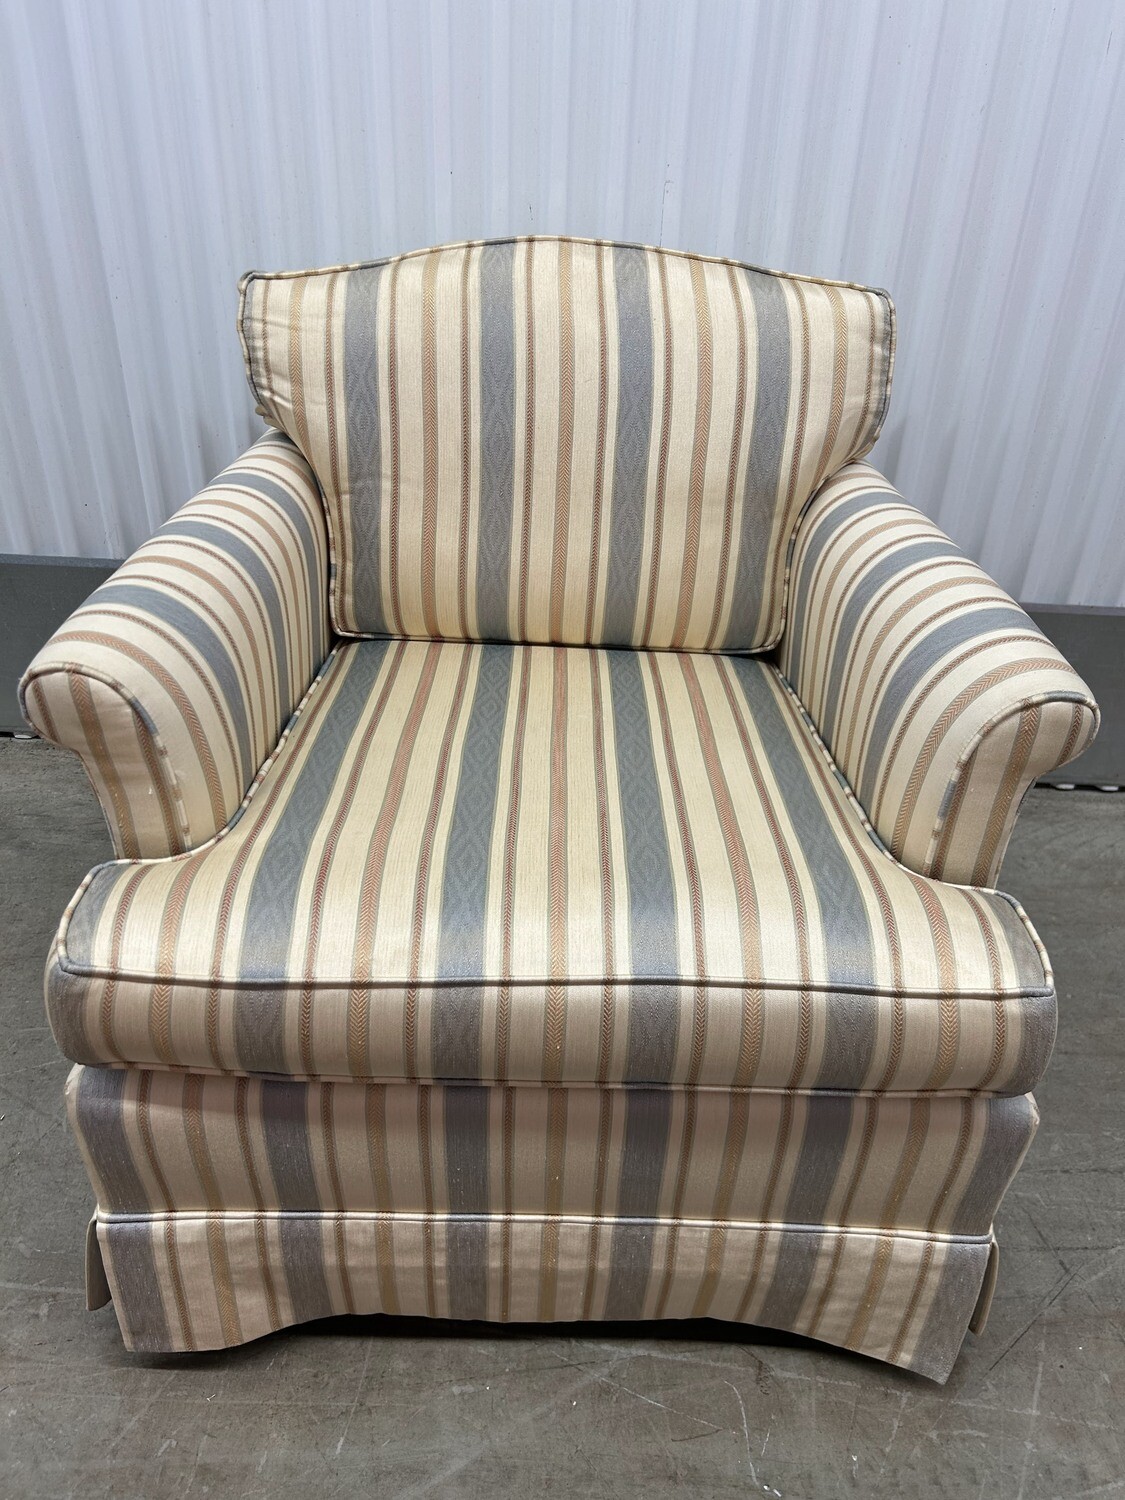 ** Ethan Allen Striped Arm Chair, nice! #2213 ** 1 mo. to sell, discounted $105